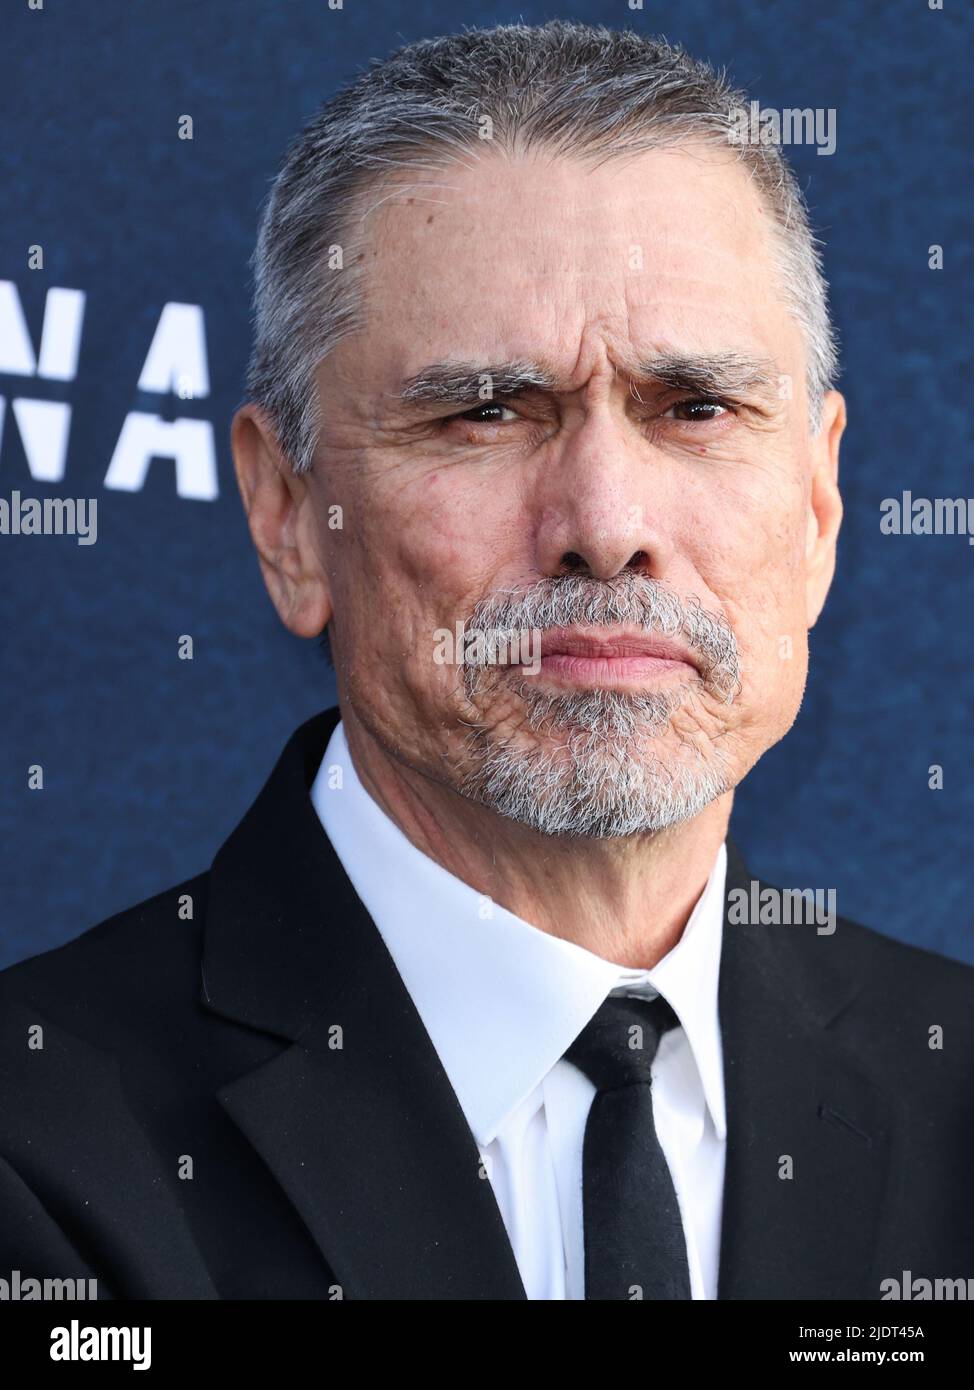 Los Angeles, United States. 22nd June, 2022. LOS ANGELES, CALIFORNIA, USA - JUNE 22: American actor Marco Rodríguez (Marco Rodriguez) arrives at the Los Angeles Premiere Of Amazon Prime Video's 'The Terminal List' Season 1 held at the Directors Guild of America Theater Complex on June 22, 2022 in Los Angeles, California, United States. (Photo by Xavier Collin/Image Press Agency) Credit: Image Press Agency/Alamy Live News Stock Photo